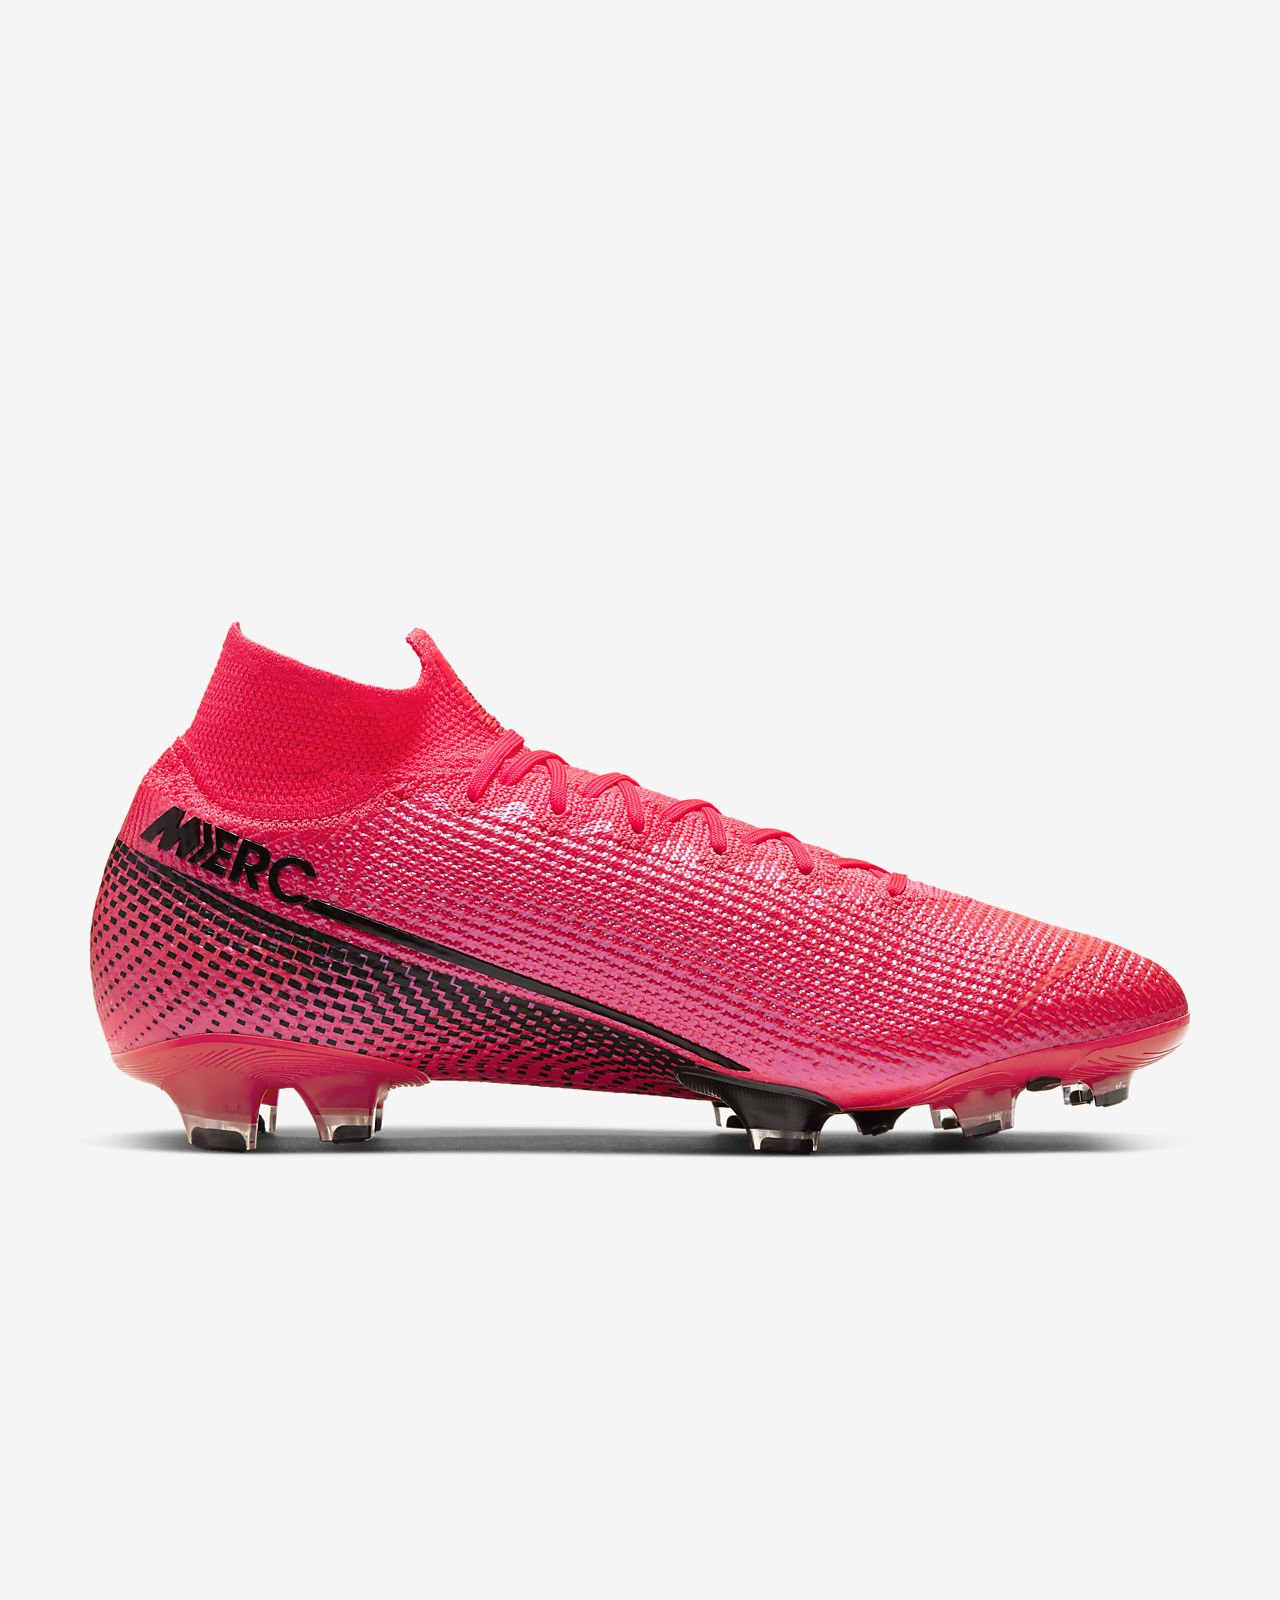 Nike Men 's shoes Mercurial Superfly 7 Elite FG Football Shoes pink.